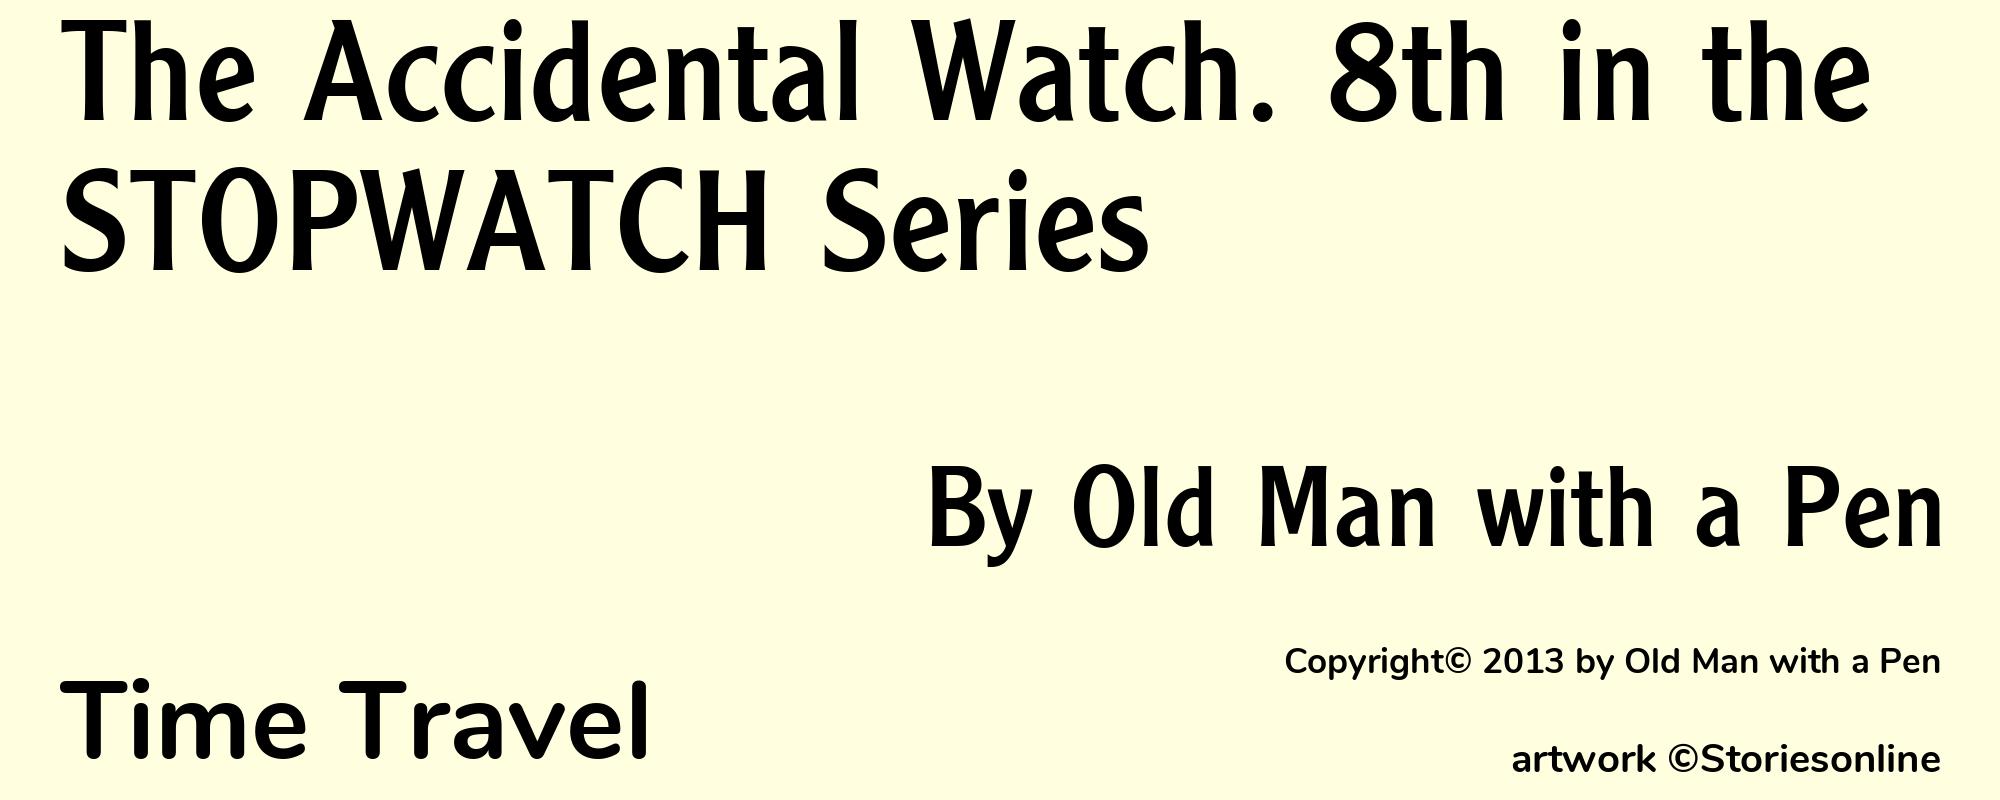 The Accidental Watch. 8th in the STOPWATCH Series - Cover